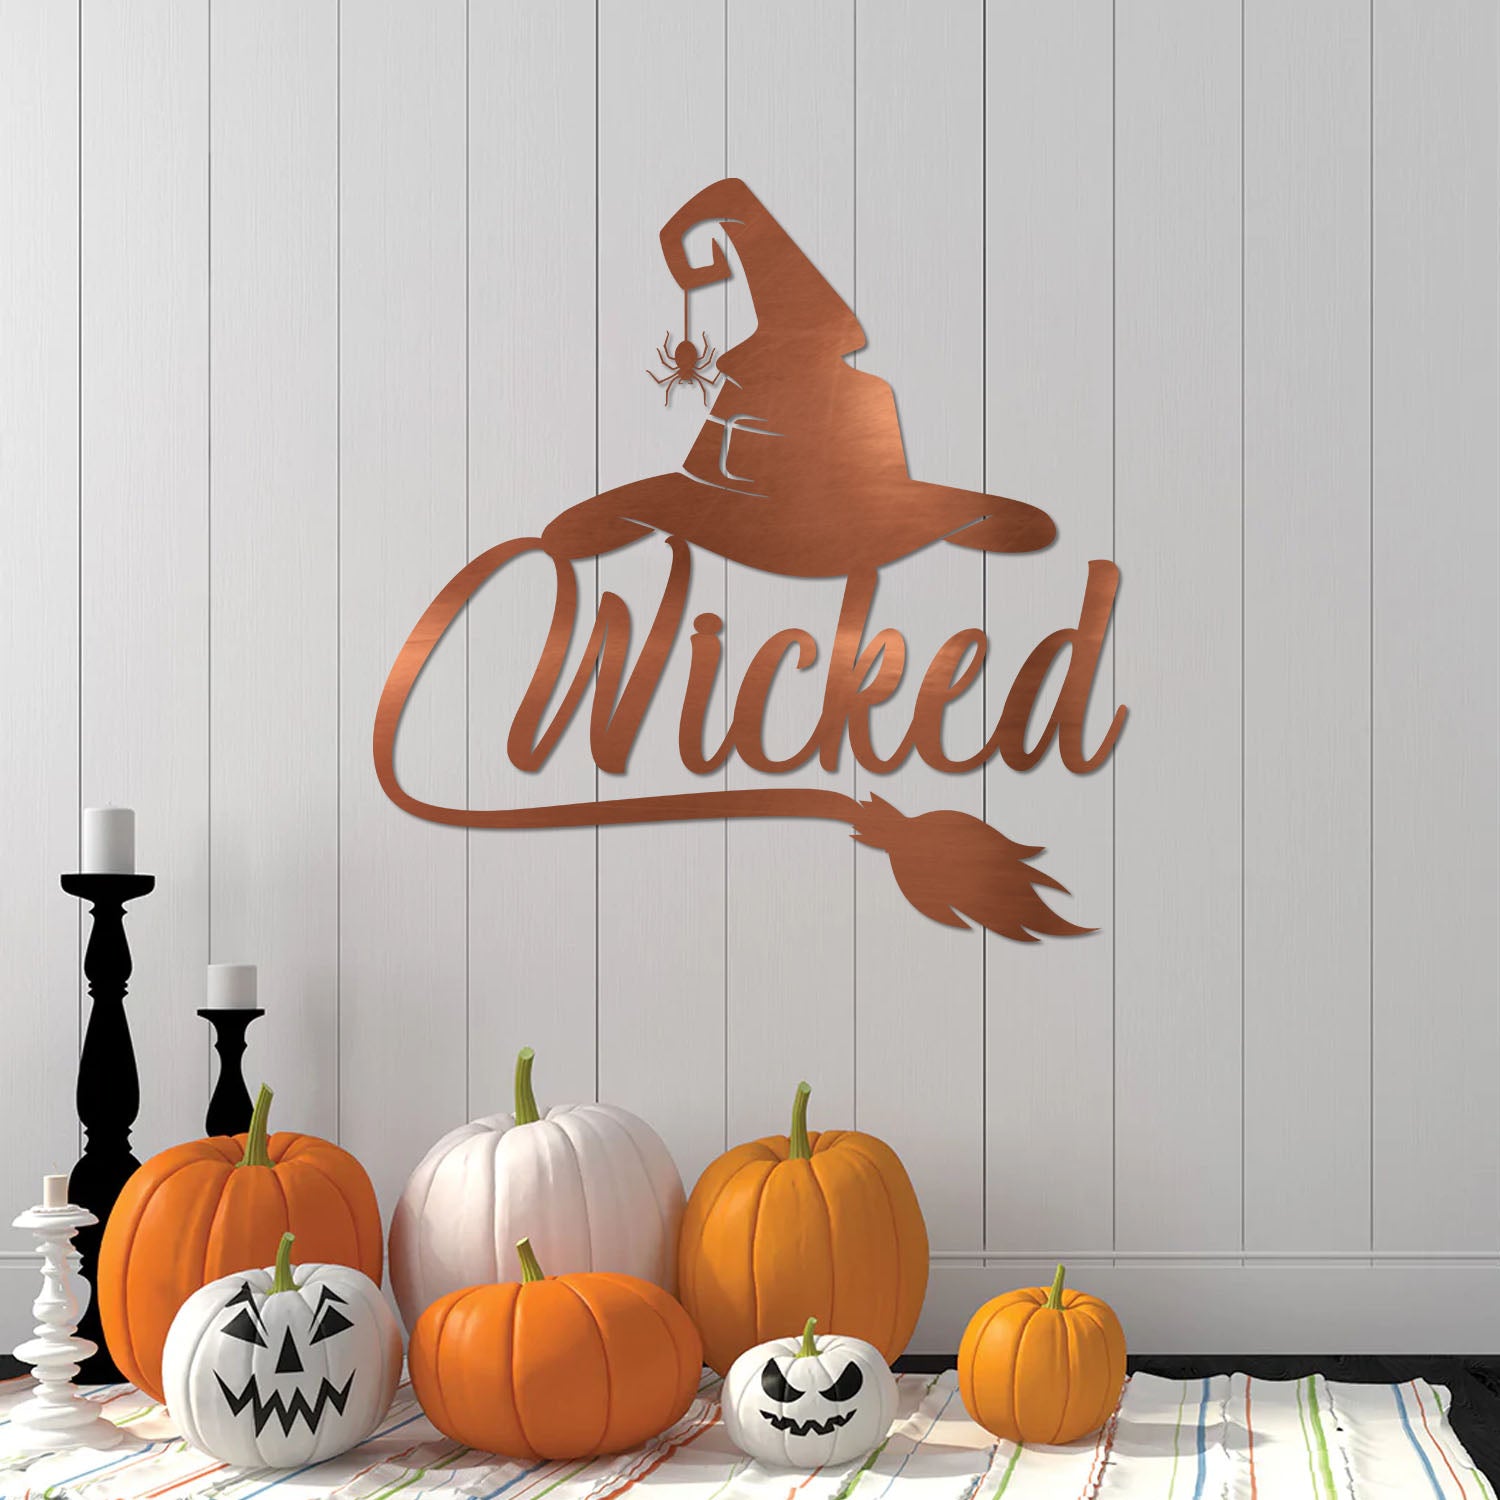 Wicked Witch Hat Metal Art, Wicked Witch Hat Halloween Welded Decor